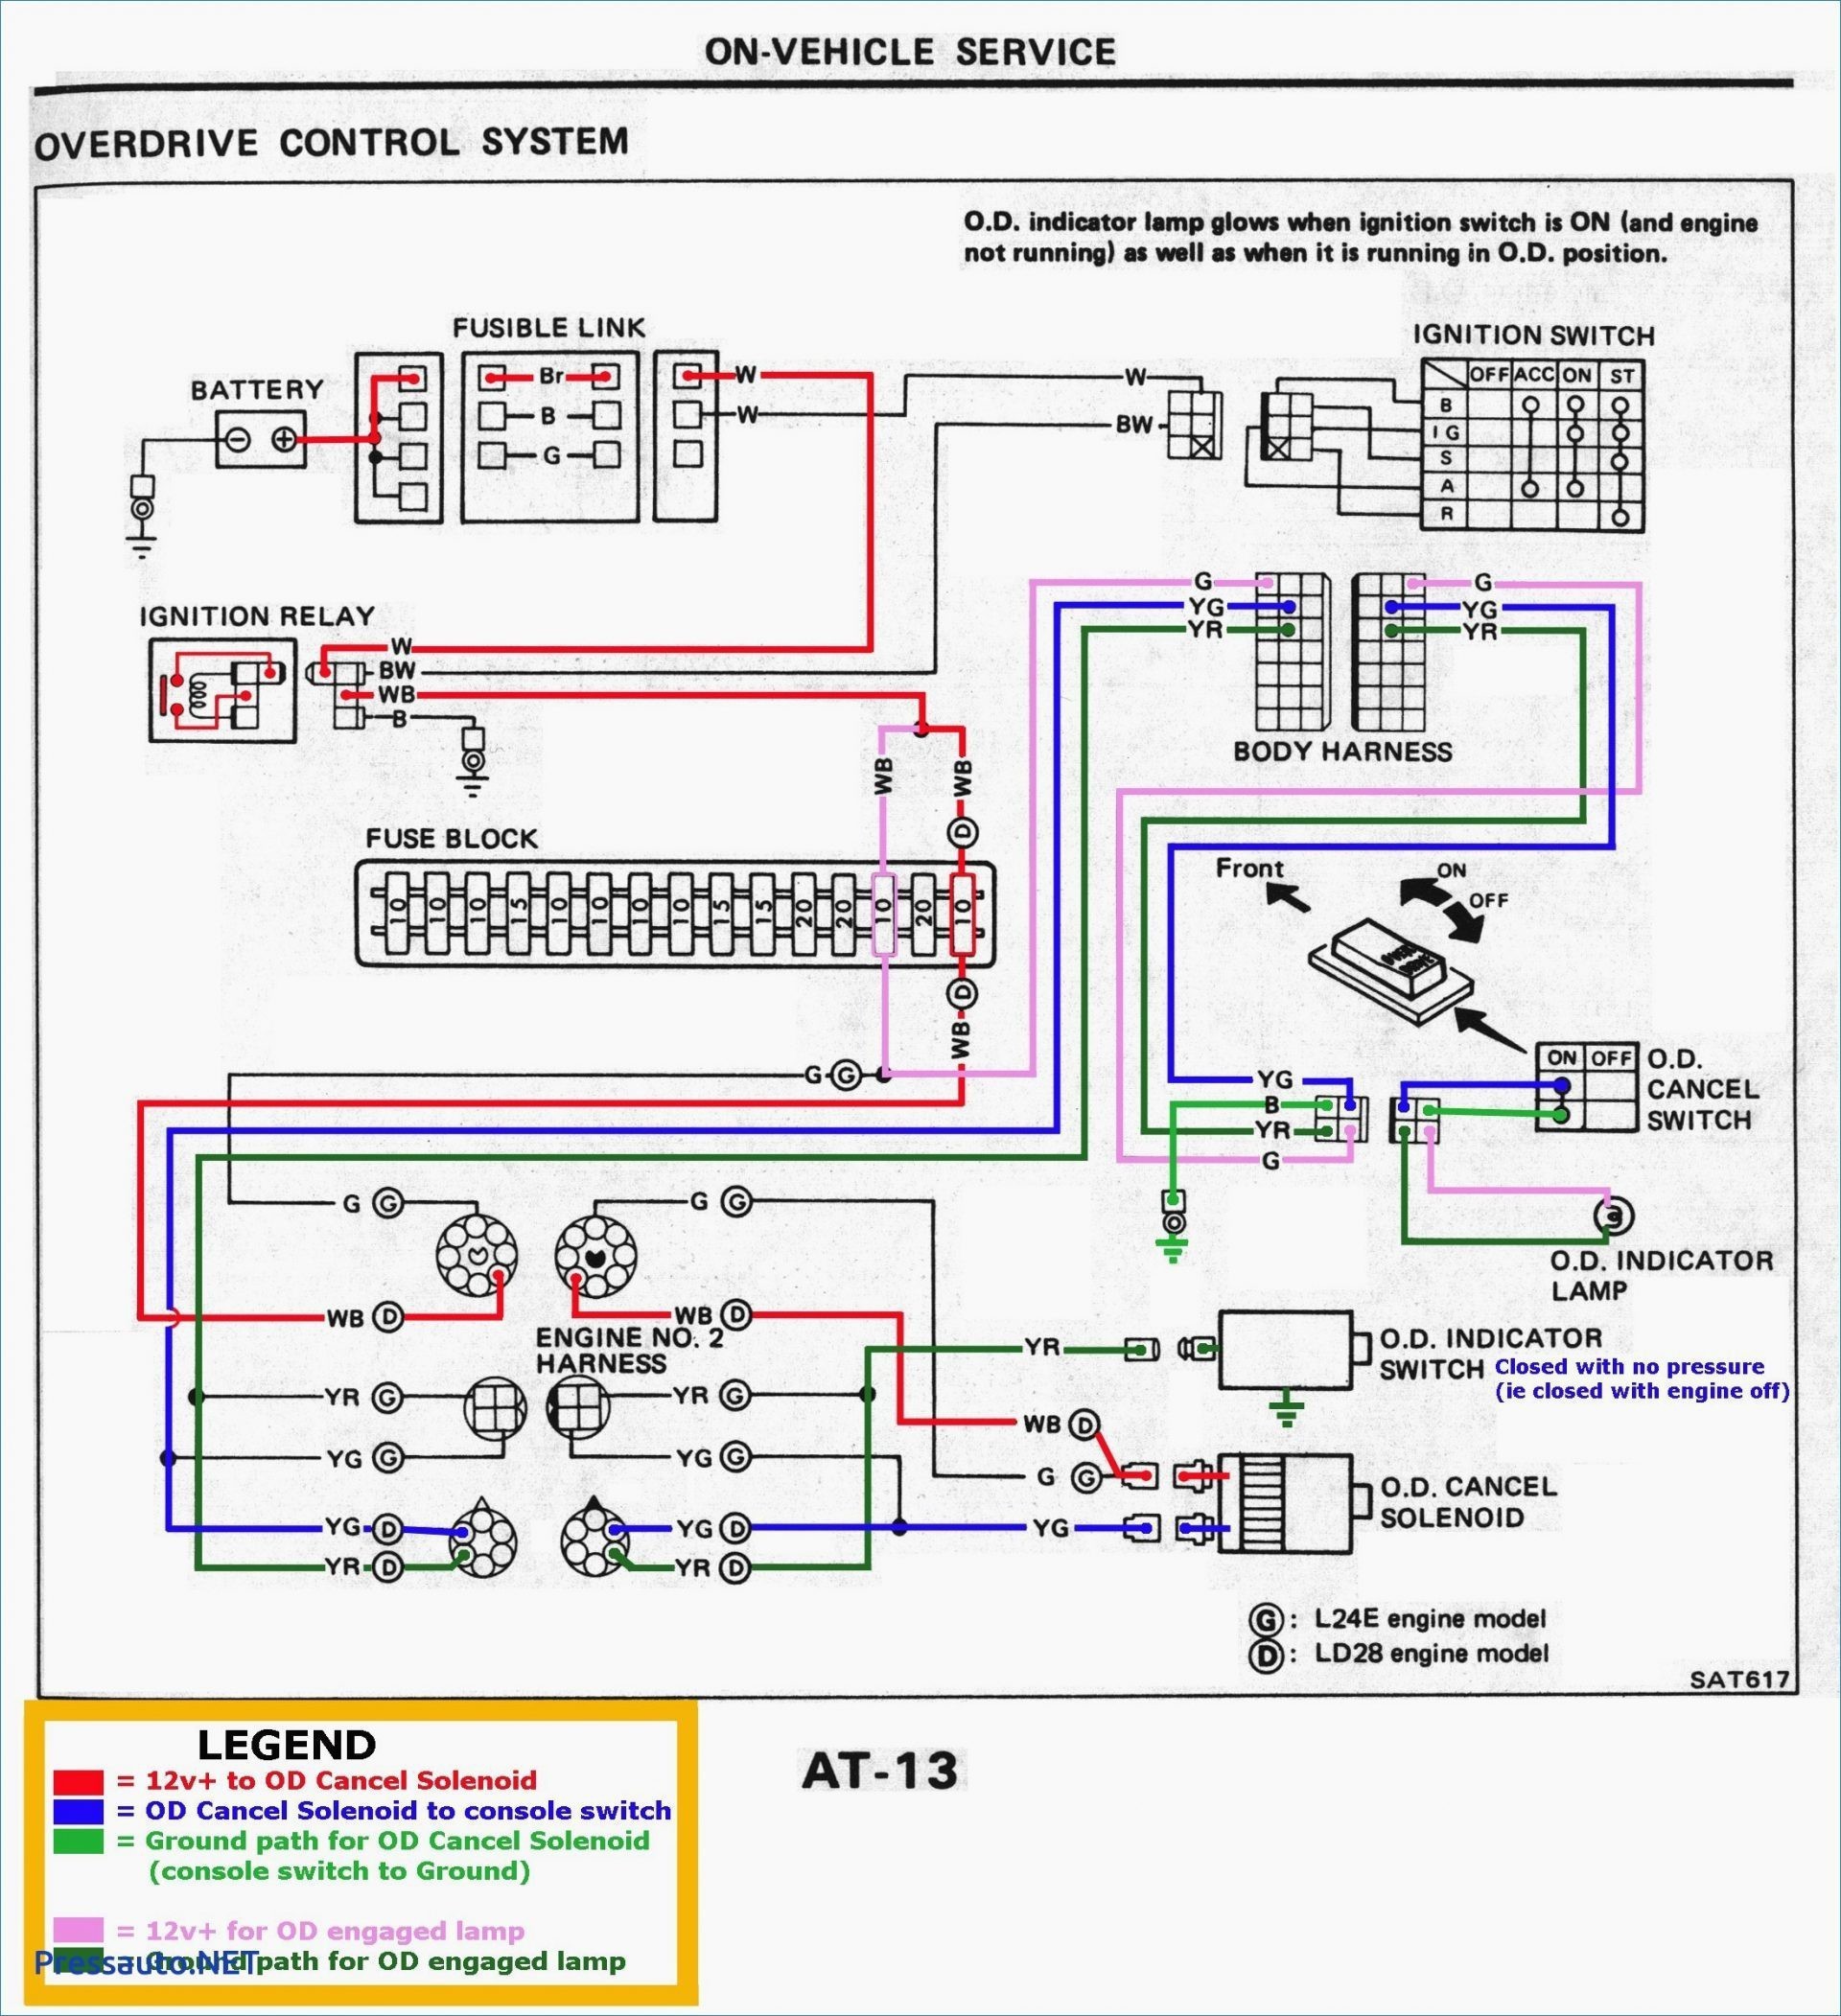 Dvc Sub Wiring Home Theater Smart Wiring Diagrams u2022 2 DVC 4 Ohm Subs 2 Channel Amp 2 4 Ohm Load Dvc Sub 4 Channel Amplifier Wiring Diagram